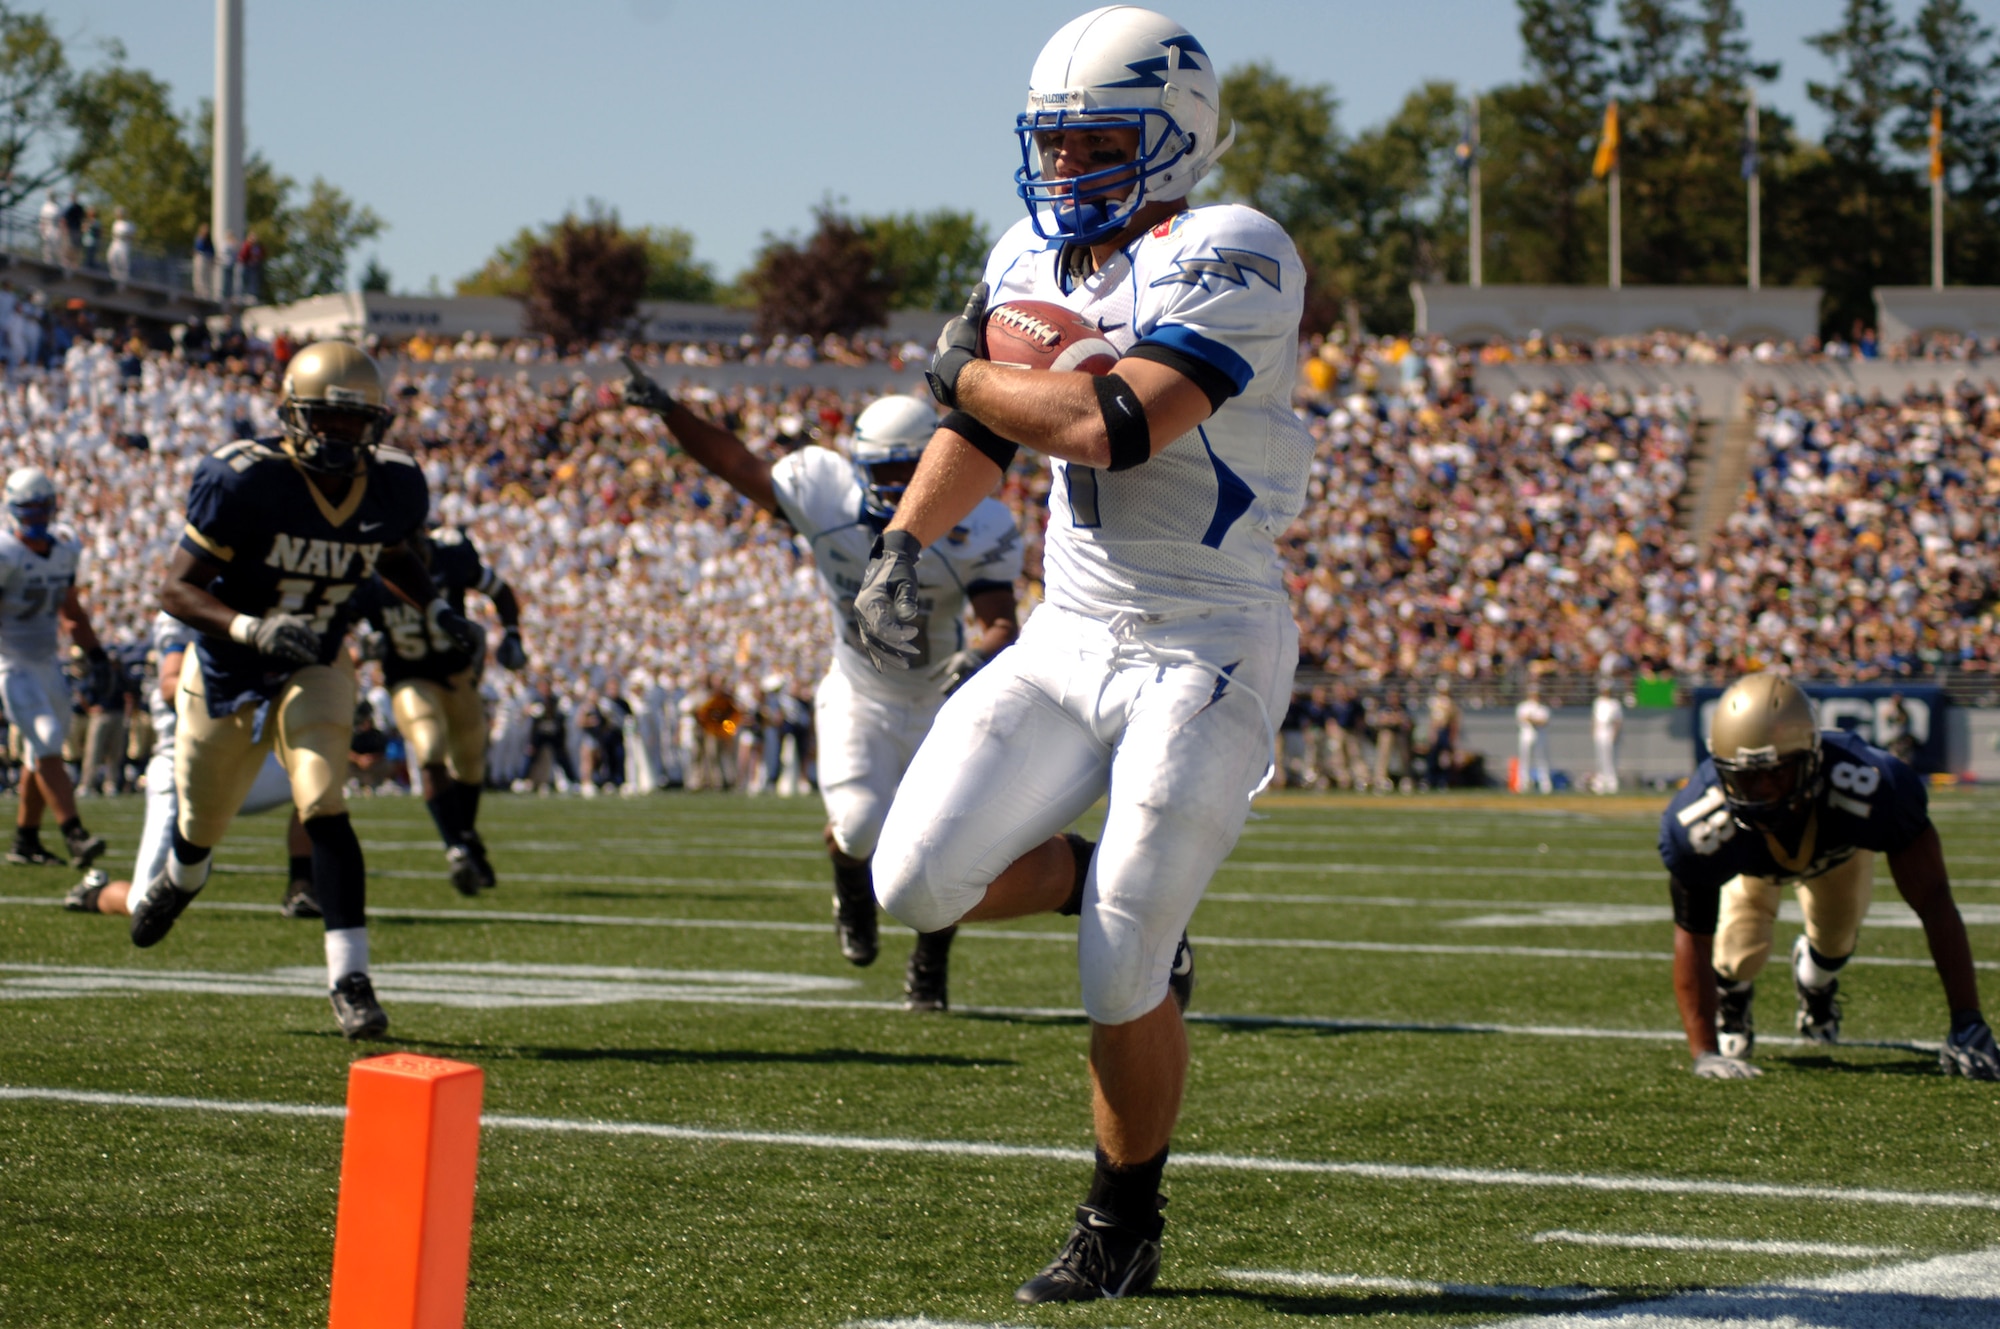 U.S. Air Force Academy Falcon senior Chad Hall high steps into the end zone at the end of his 16-yard touchdown run in the second quarter of Air Force's 31-20 loss to Navy Sept. 29 at Annapolis, Md. Hall also caught a game-high eight passes for 108 yards. (U.S. Air Force photo/Capt. Jillian Torango) 
